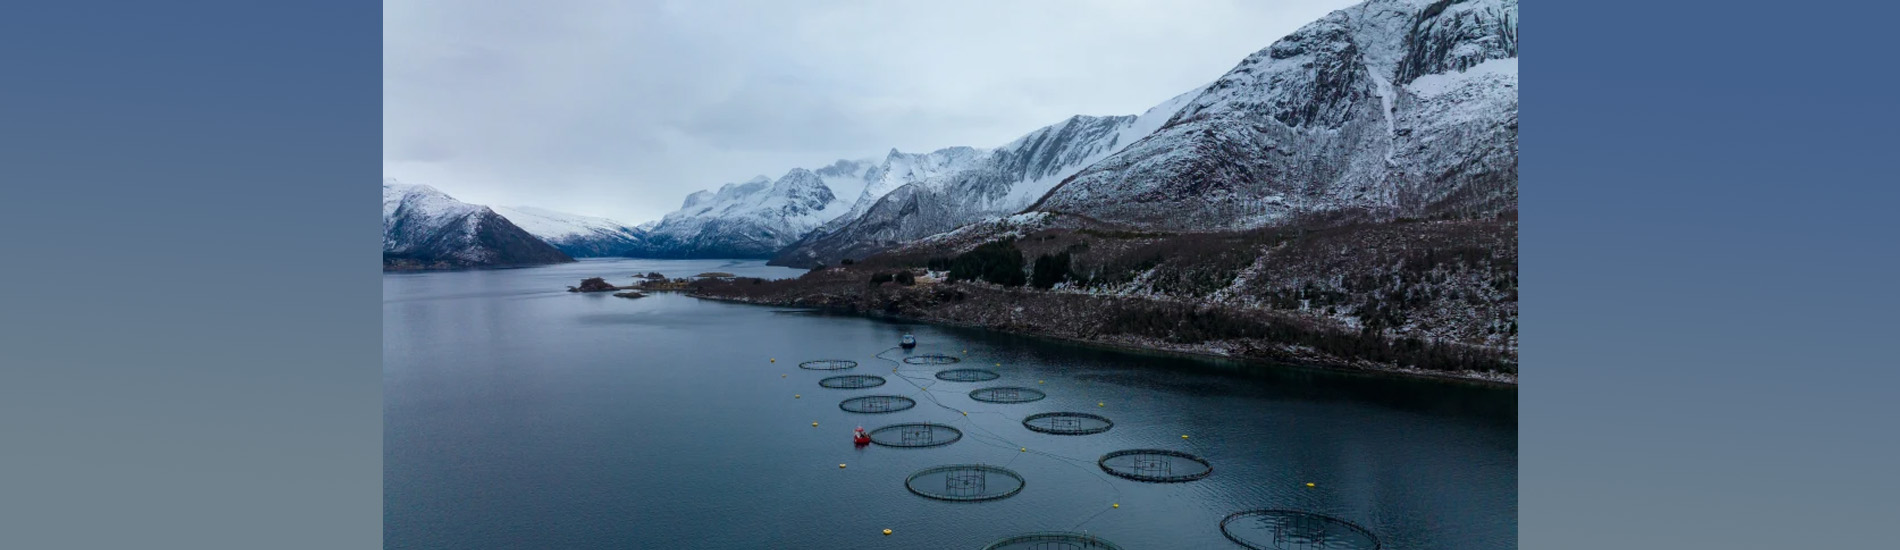 Norwegian Aquaculture is the Top-Ranked Sustainable Animal Protein Production